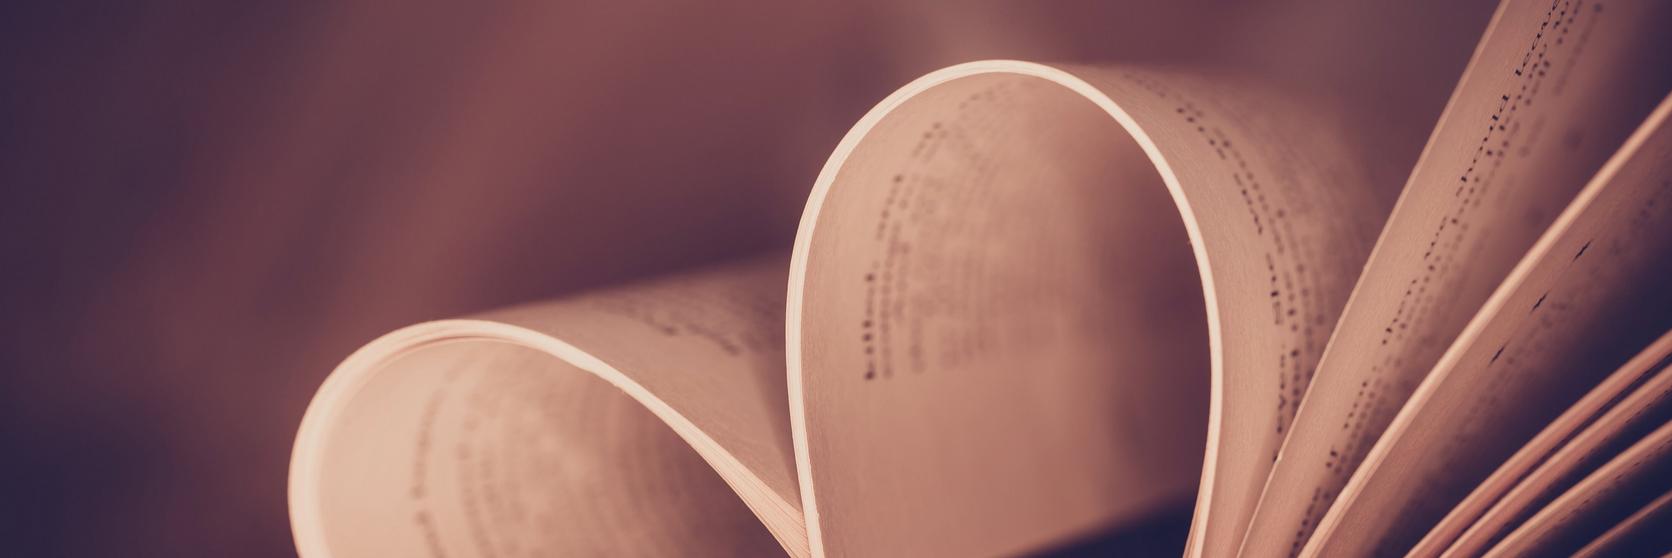 book-heart-shaped-pages